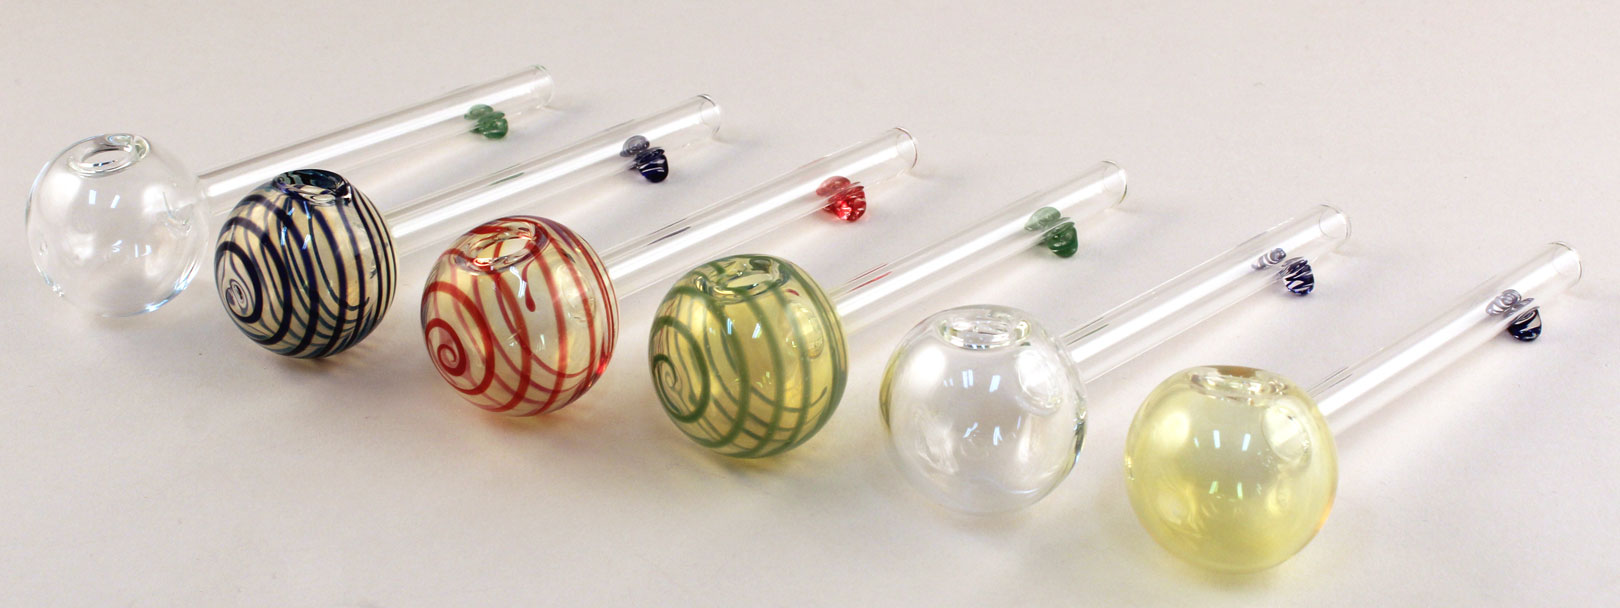 Puff Pipes for smoking concentrates